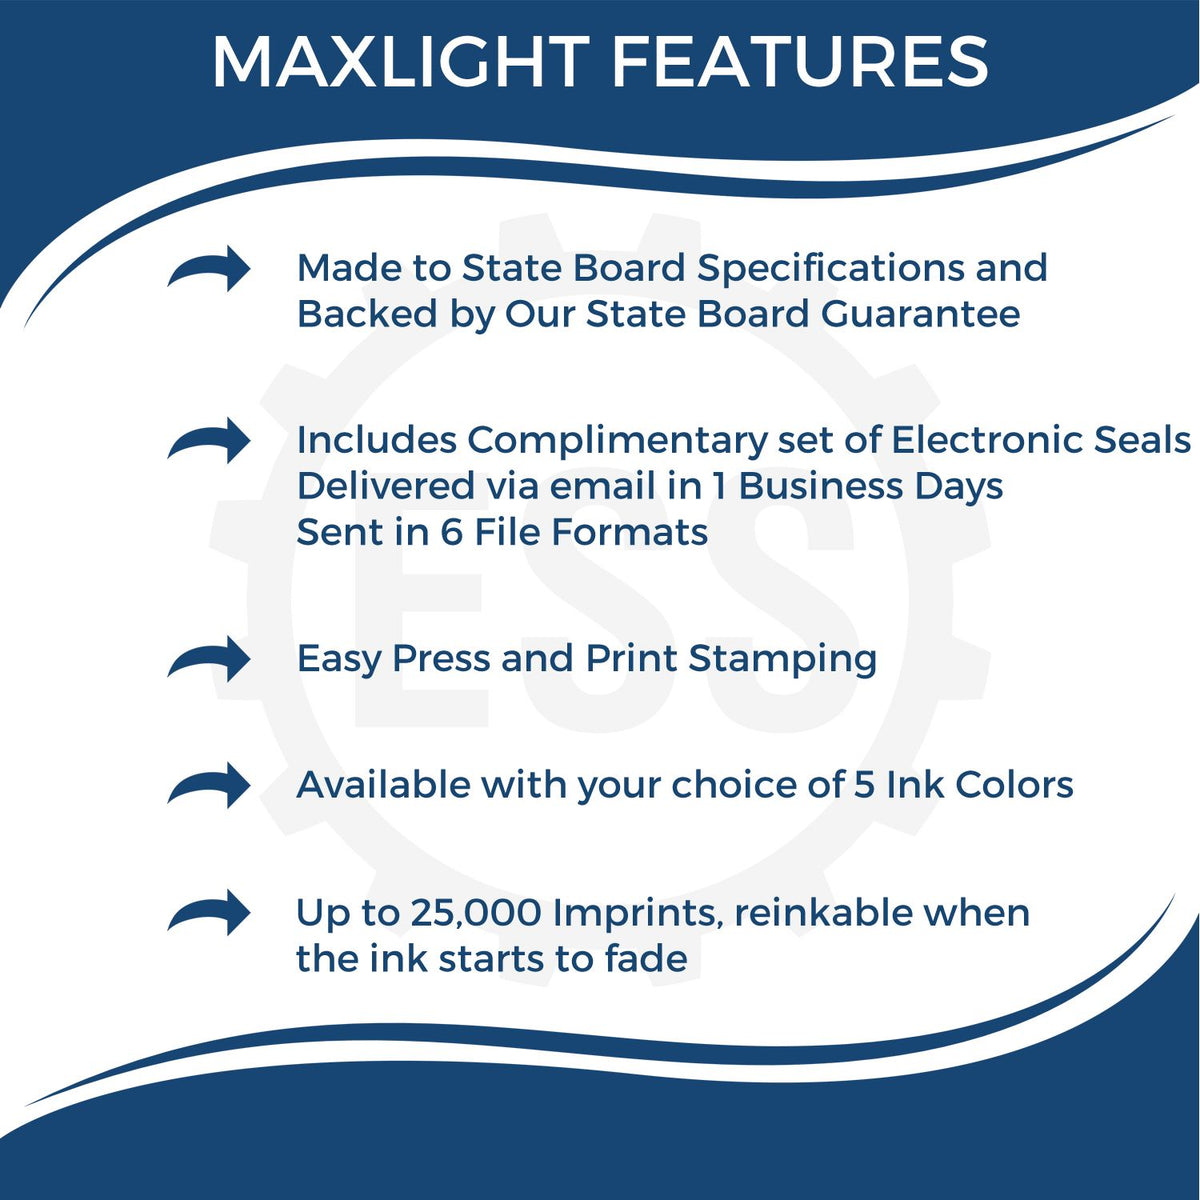 A picture of an infographic highlighting the selling points for the Premium MaxLight Pre-Inked Arkansas Engineering Stamp